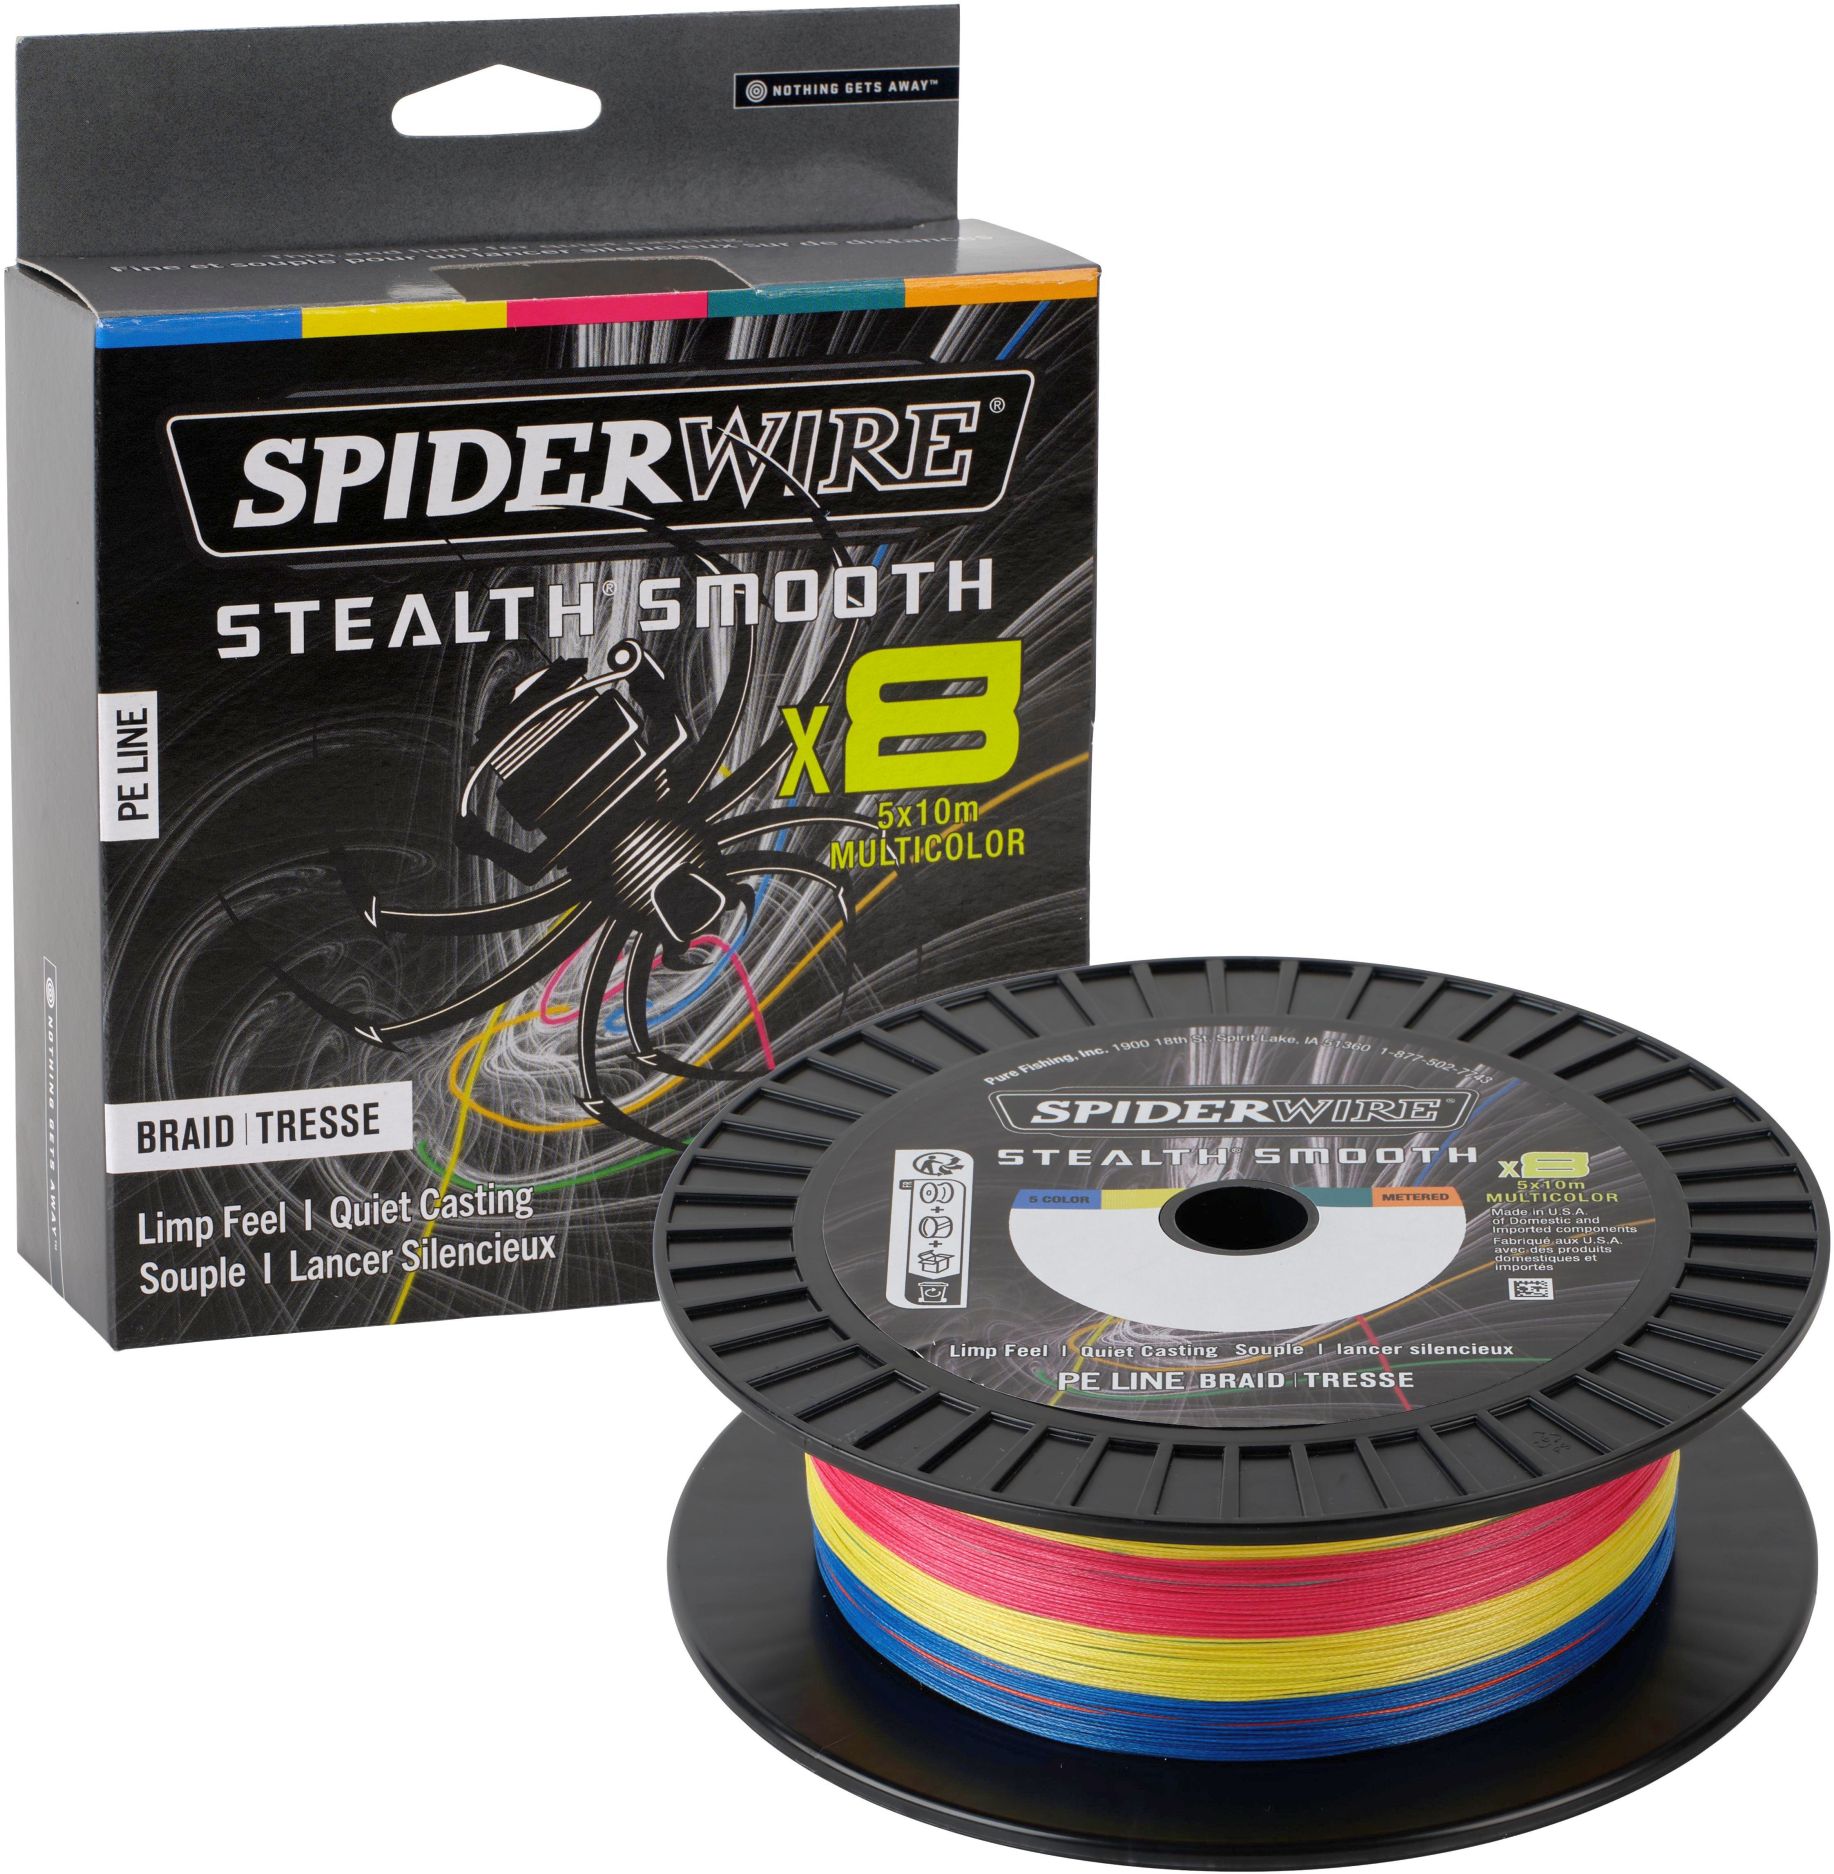 SPIDERWIRE Stealth Smooth 8 Multicolor 600 m 0,19 mm 18 kg